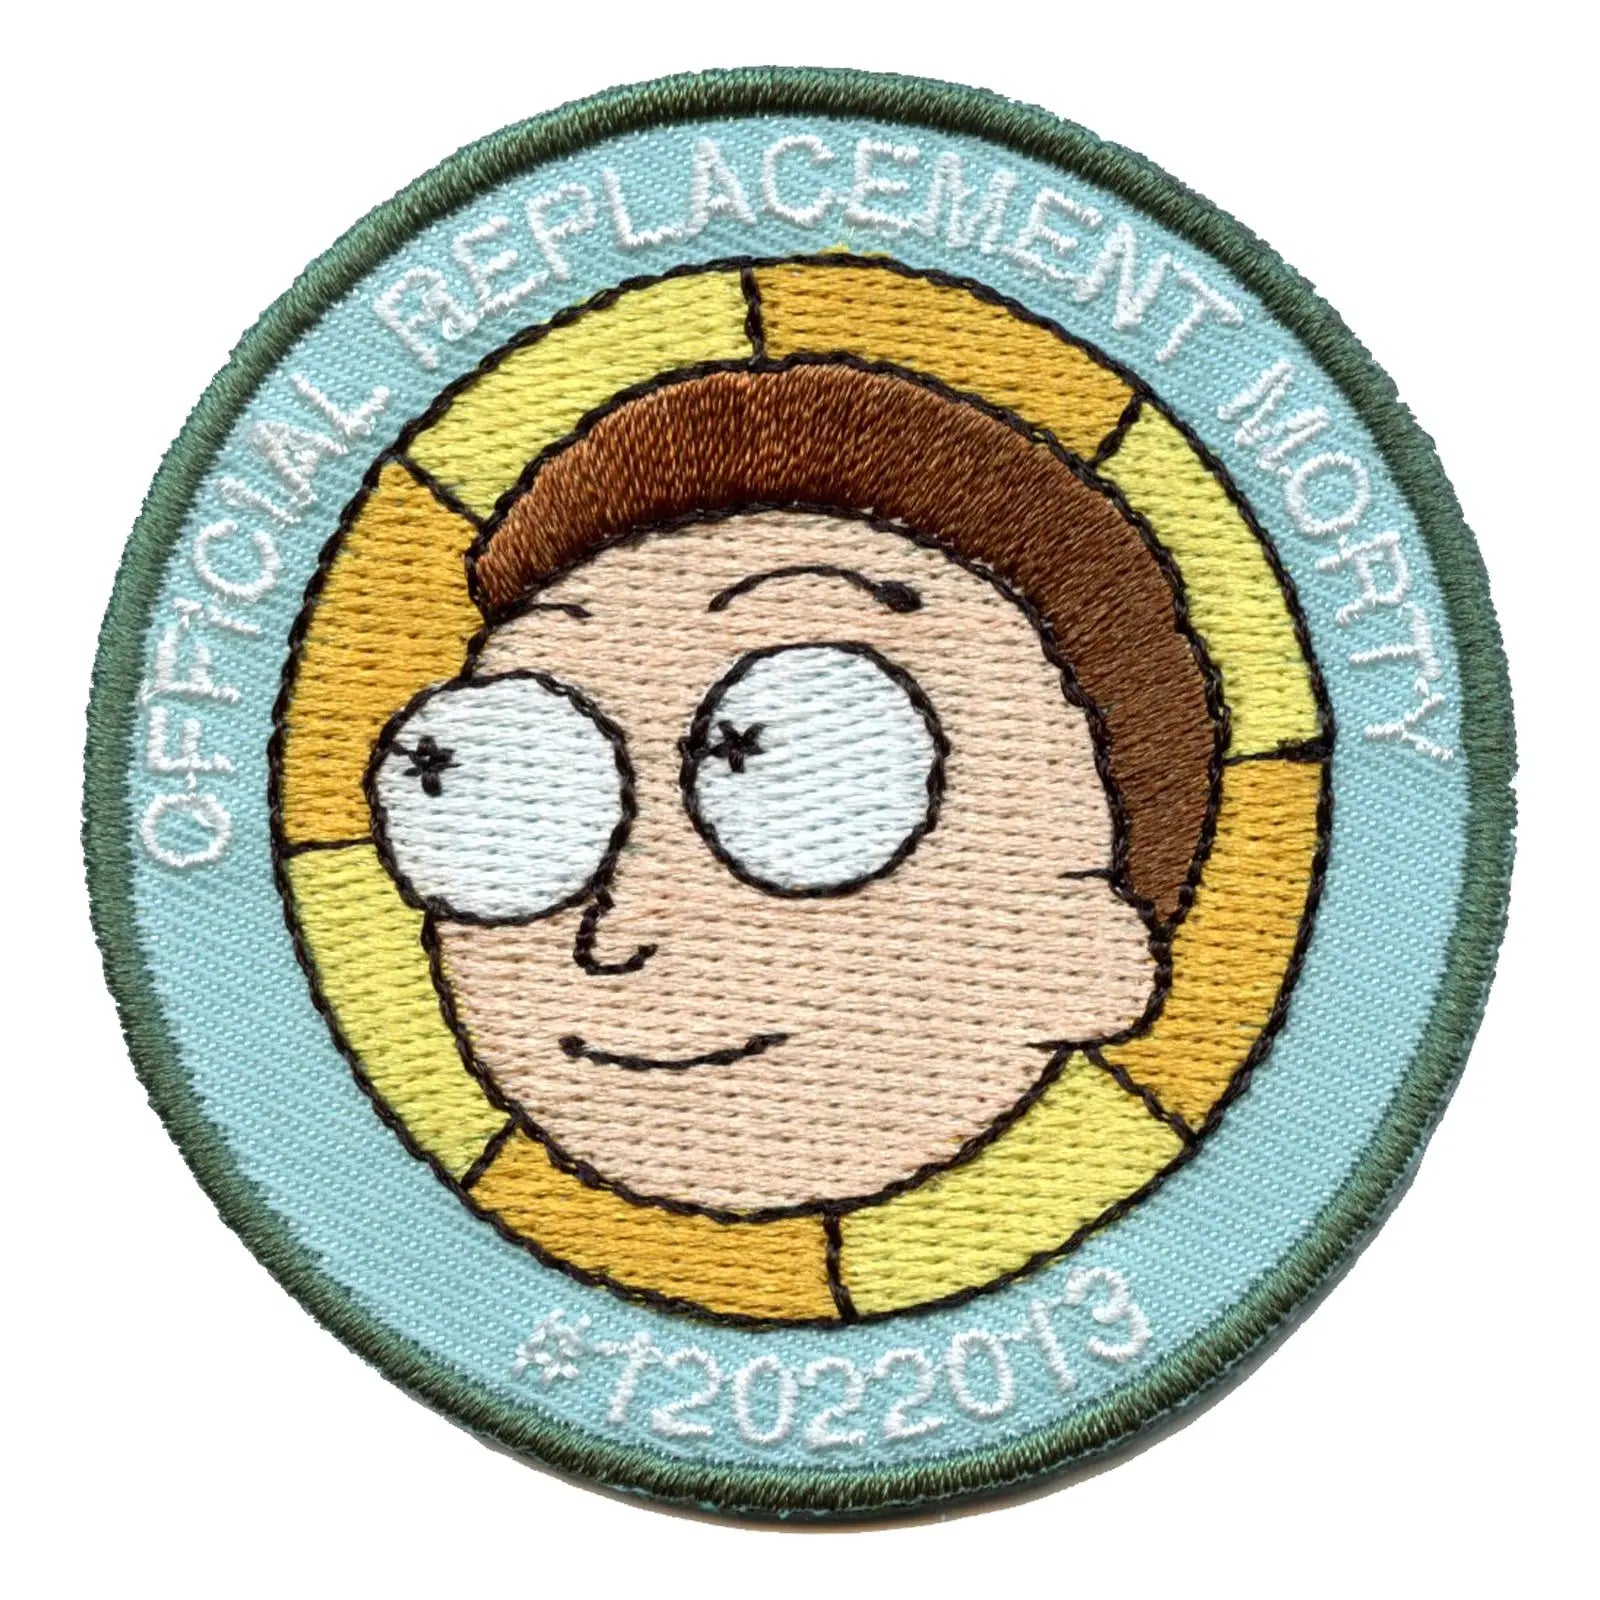 Rick and Morty 'Official Replacement Morty' Badge Embroidered Iron On Patch 